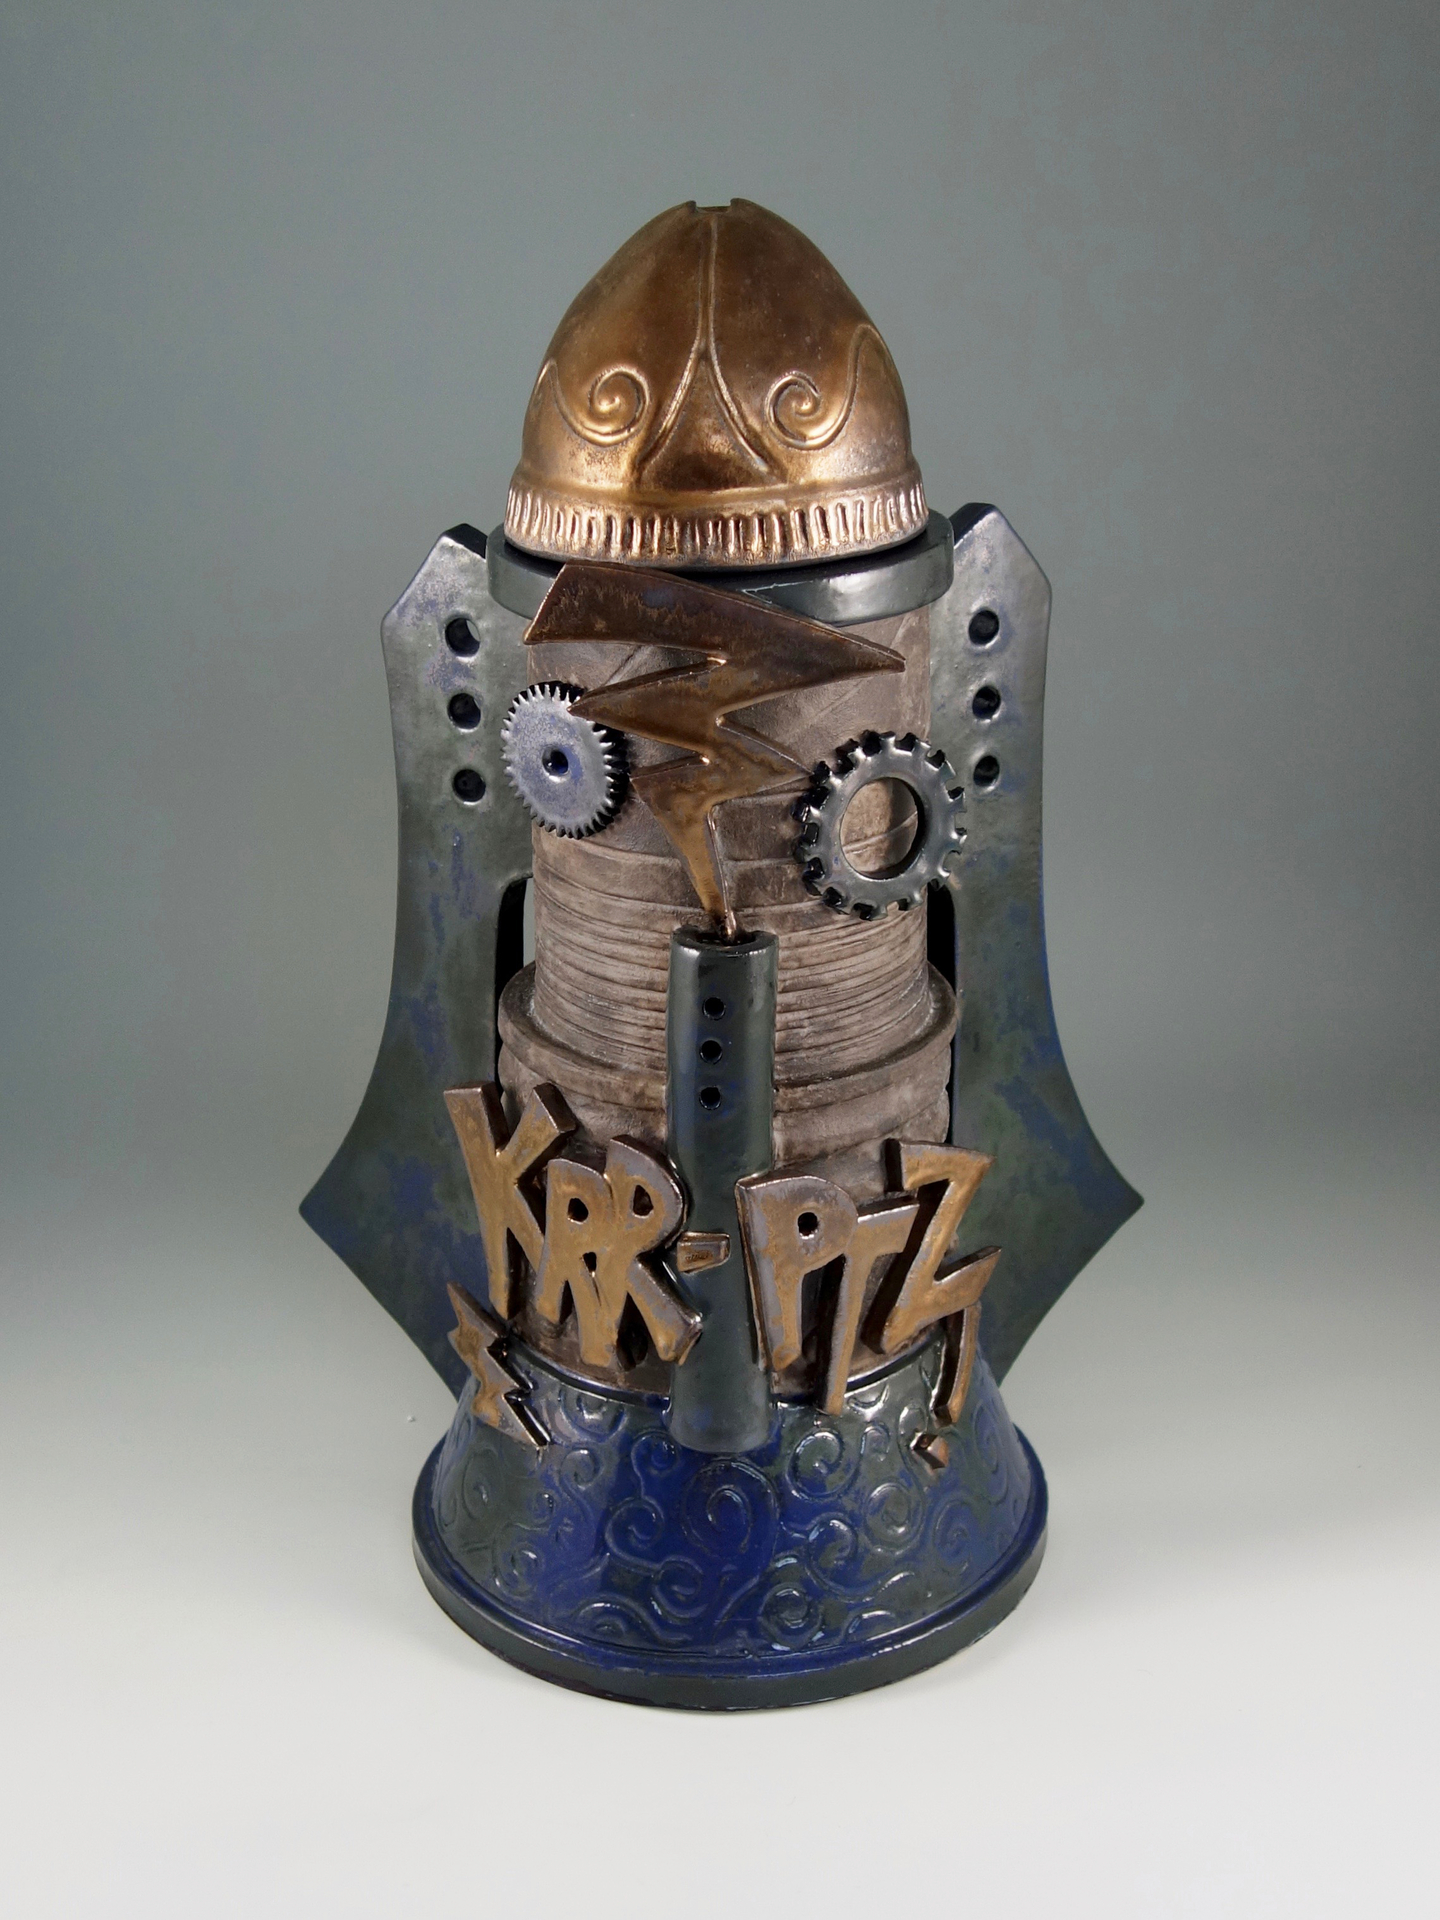  dark blue, metal, and bronze colored, futuristic style cookie jar with the word "KRR-PTZ" on the front with metal cogs and bronzed lightening strikes.